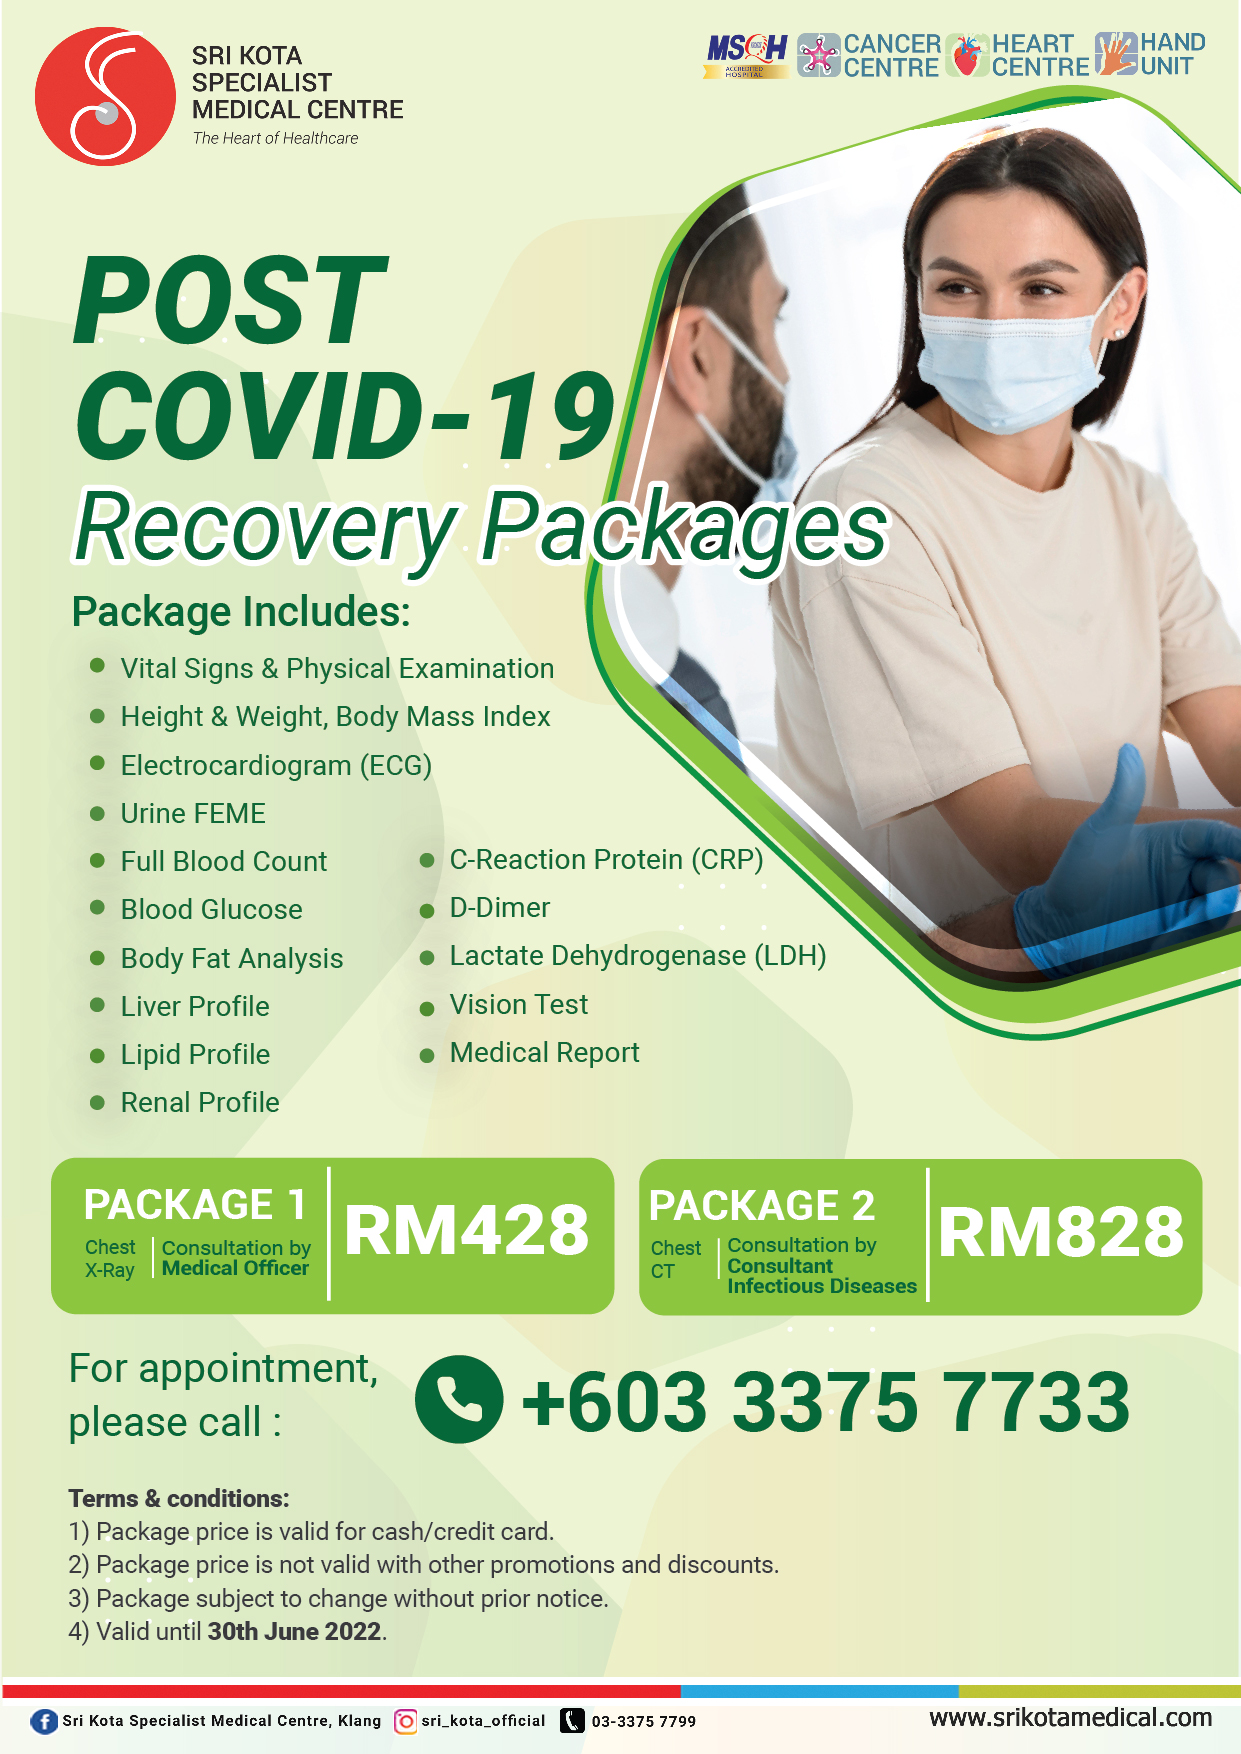 Post Covid-19 Recovery Packages